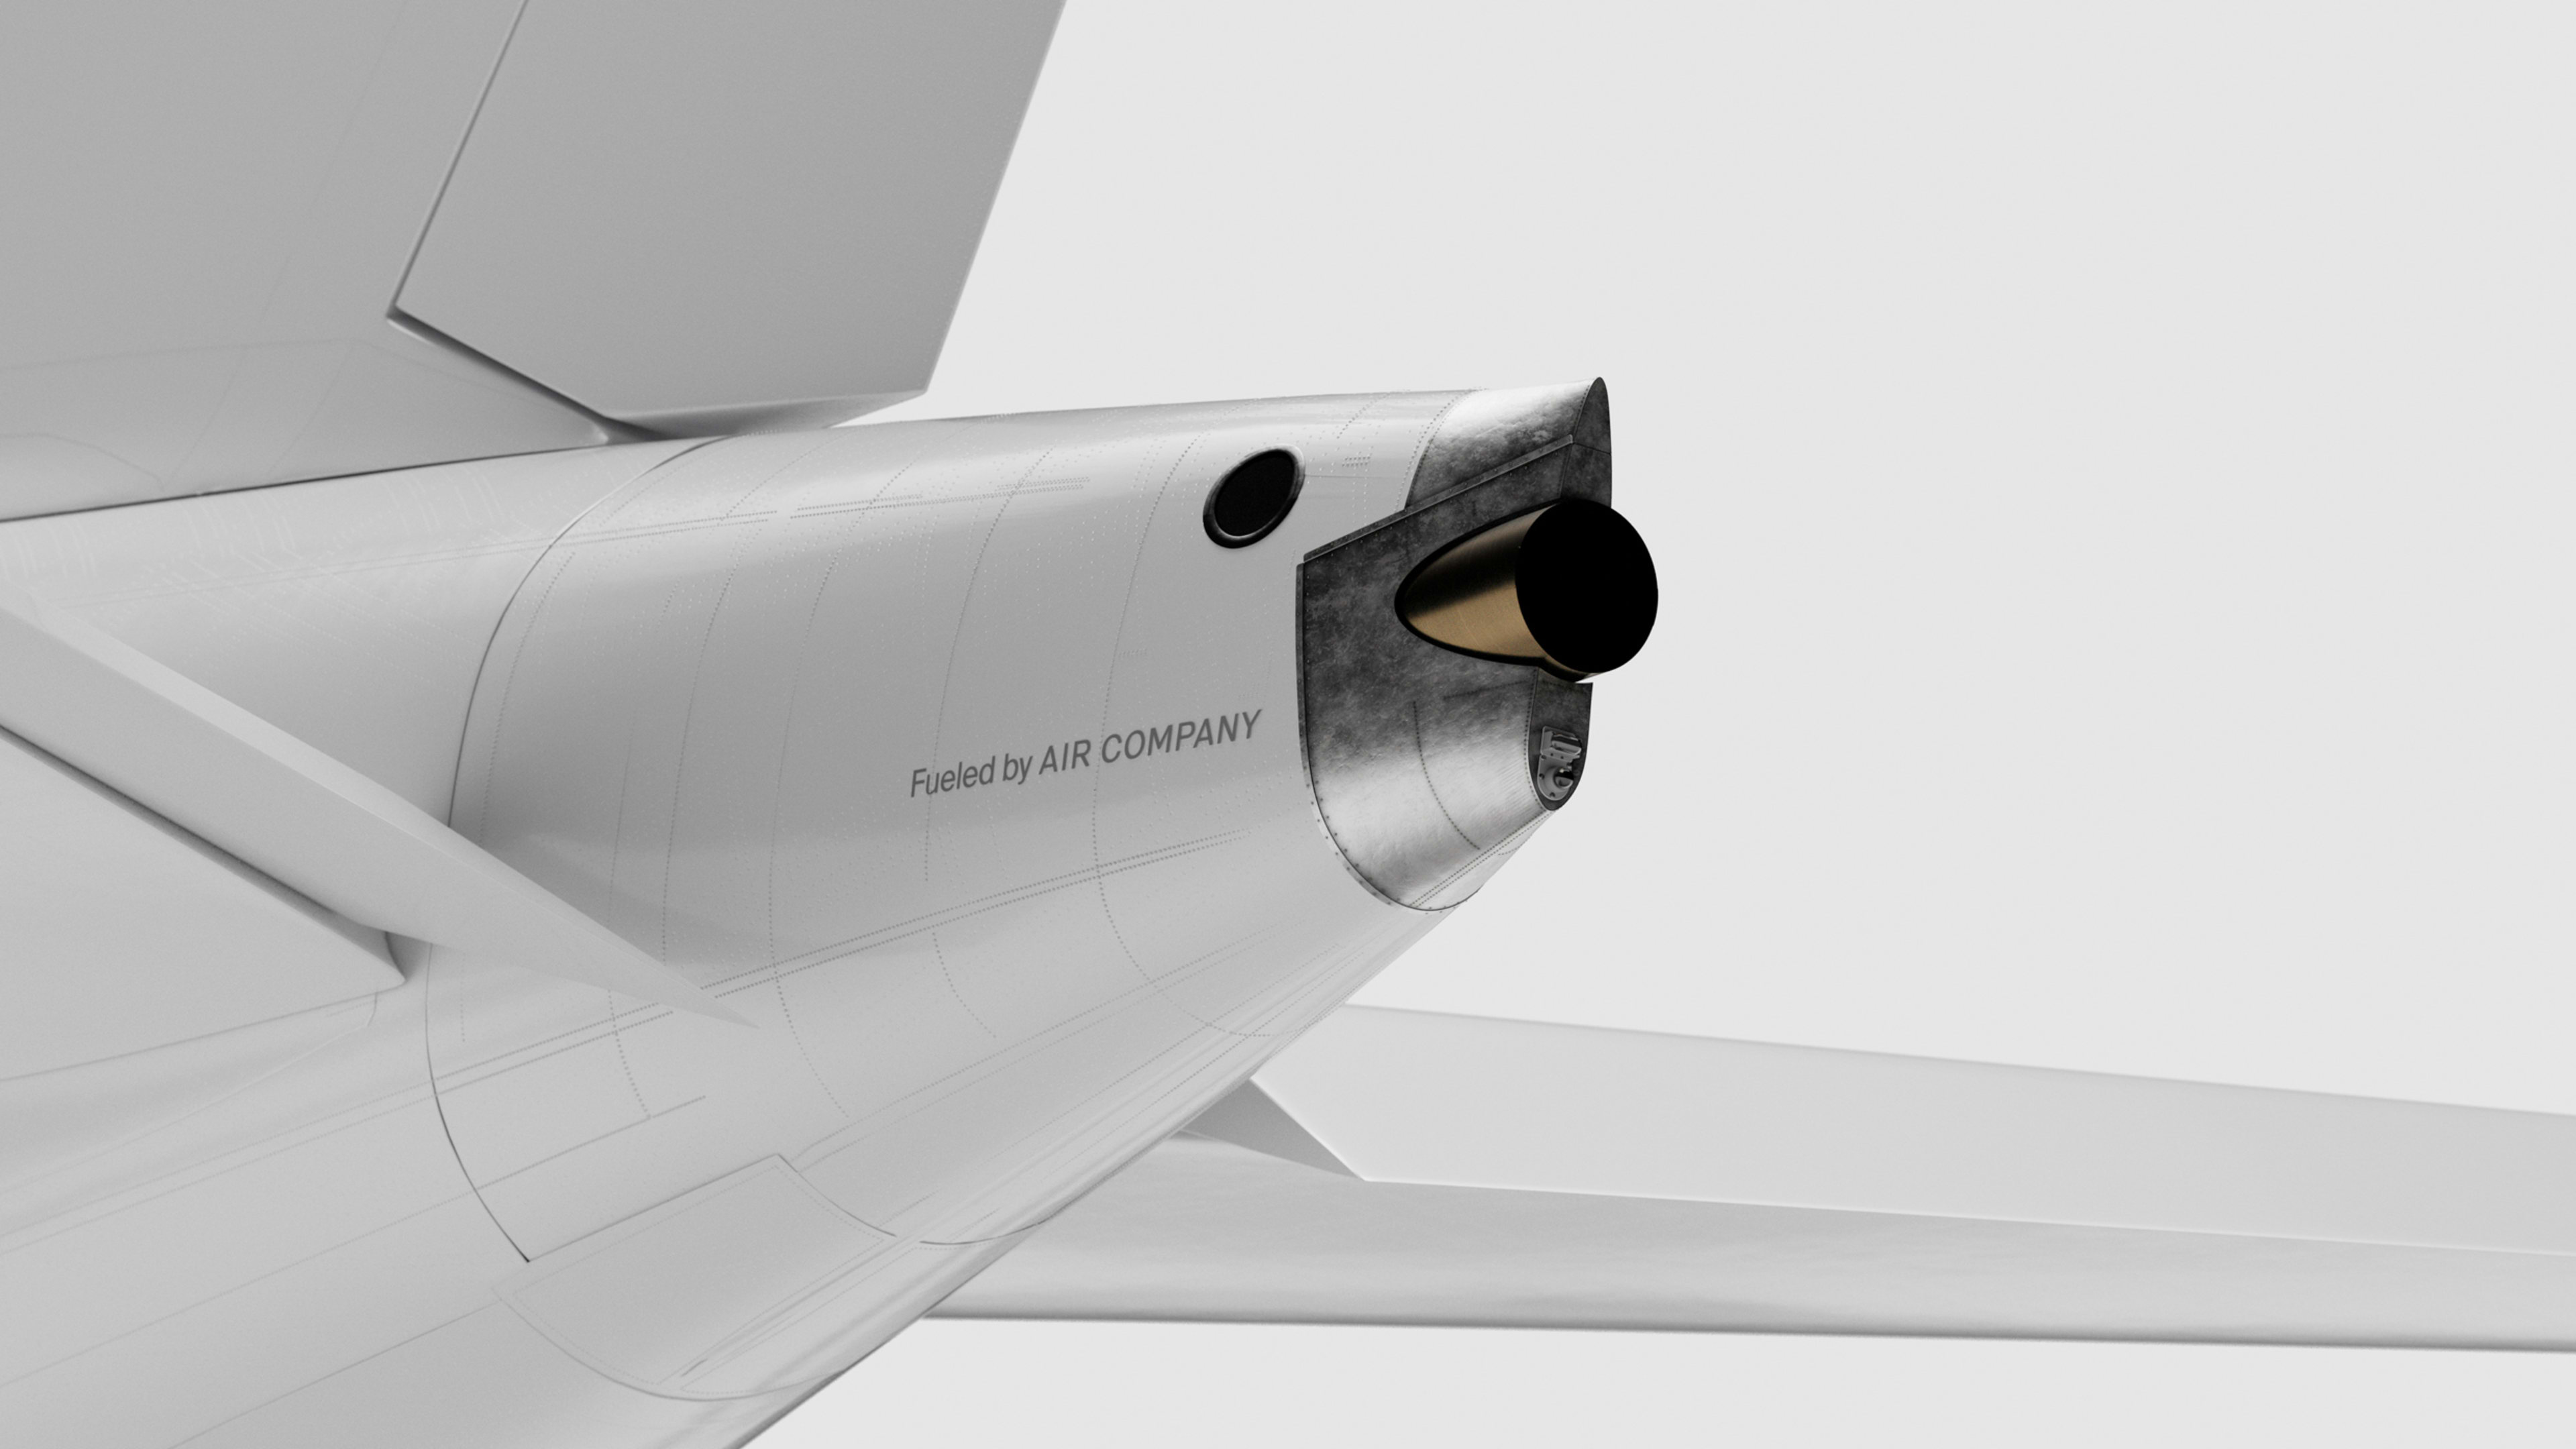 This jet fuel was made by sucking carbon out of the air. It could power your flights by 2024